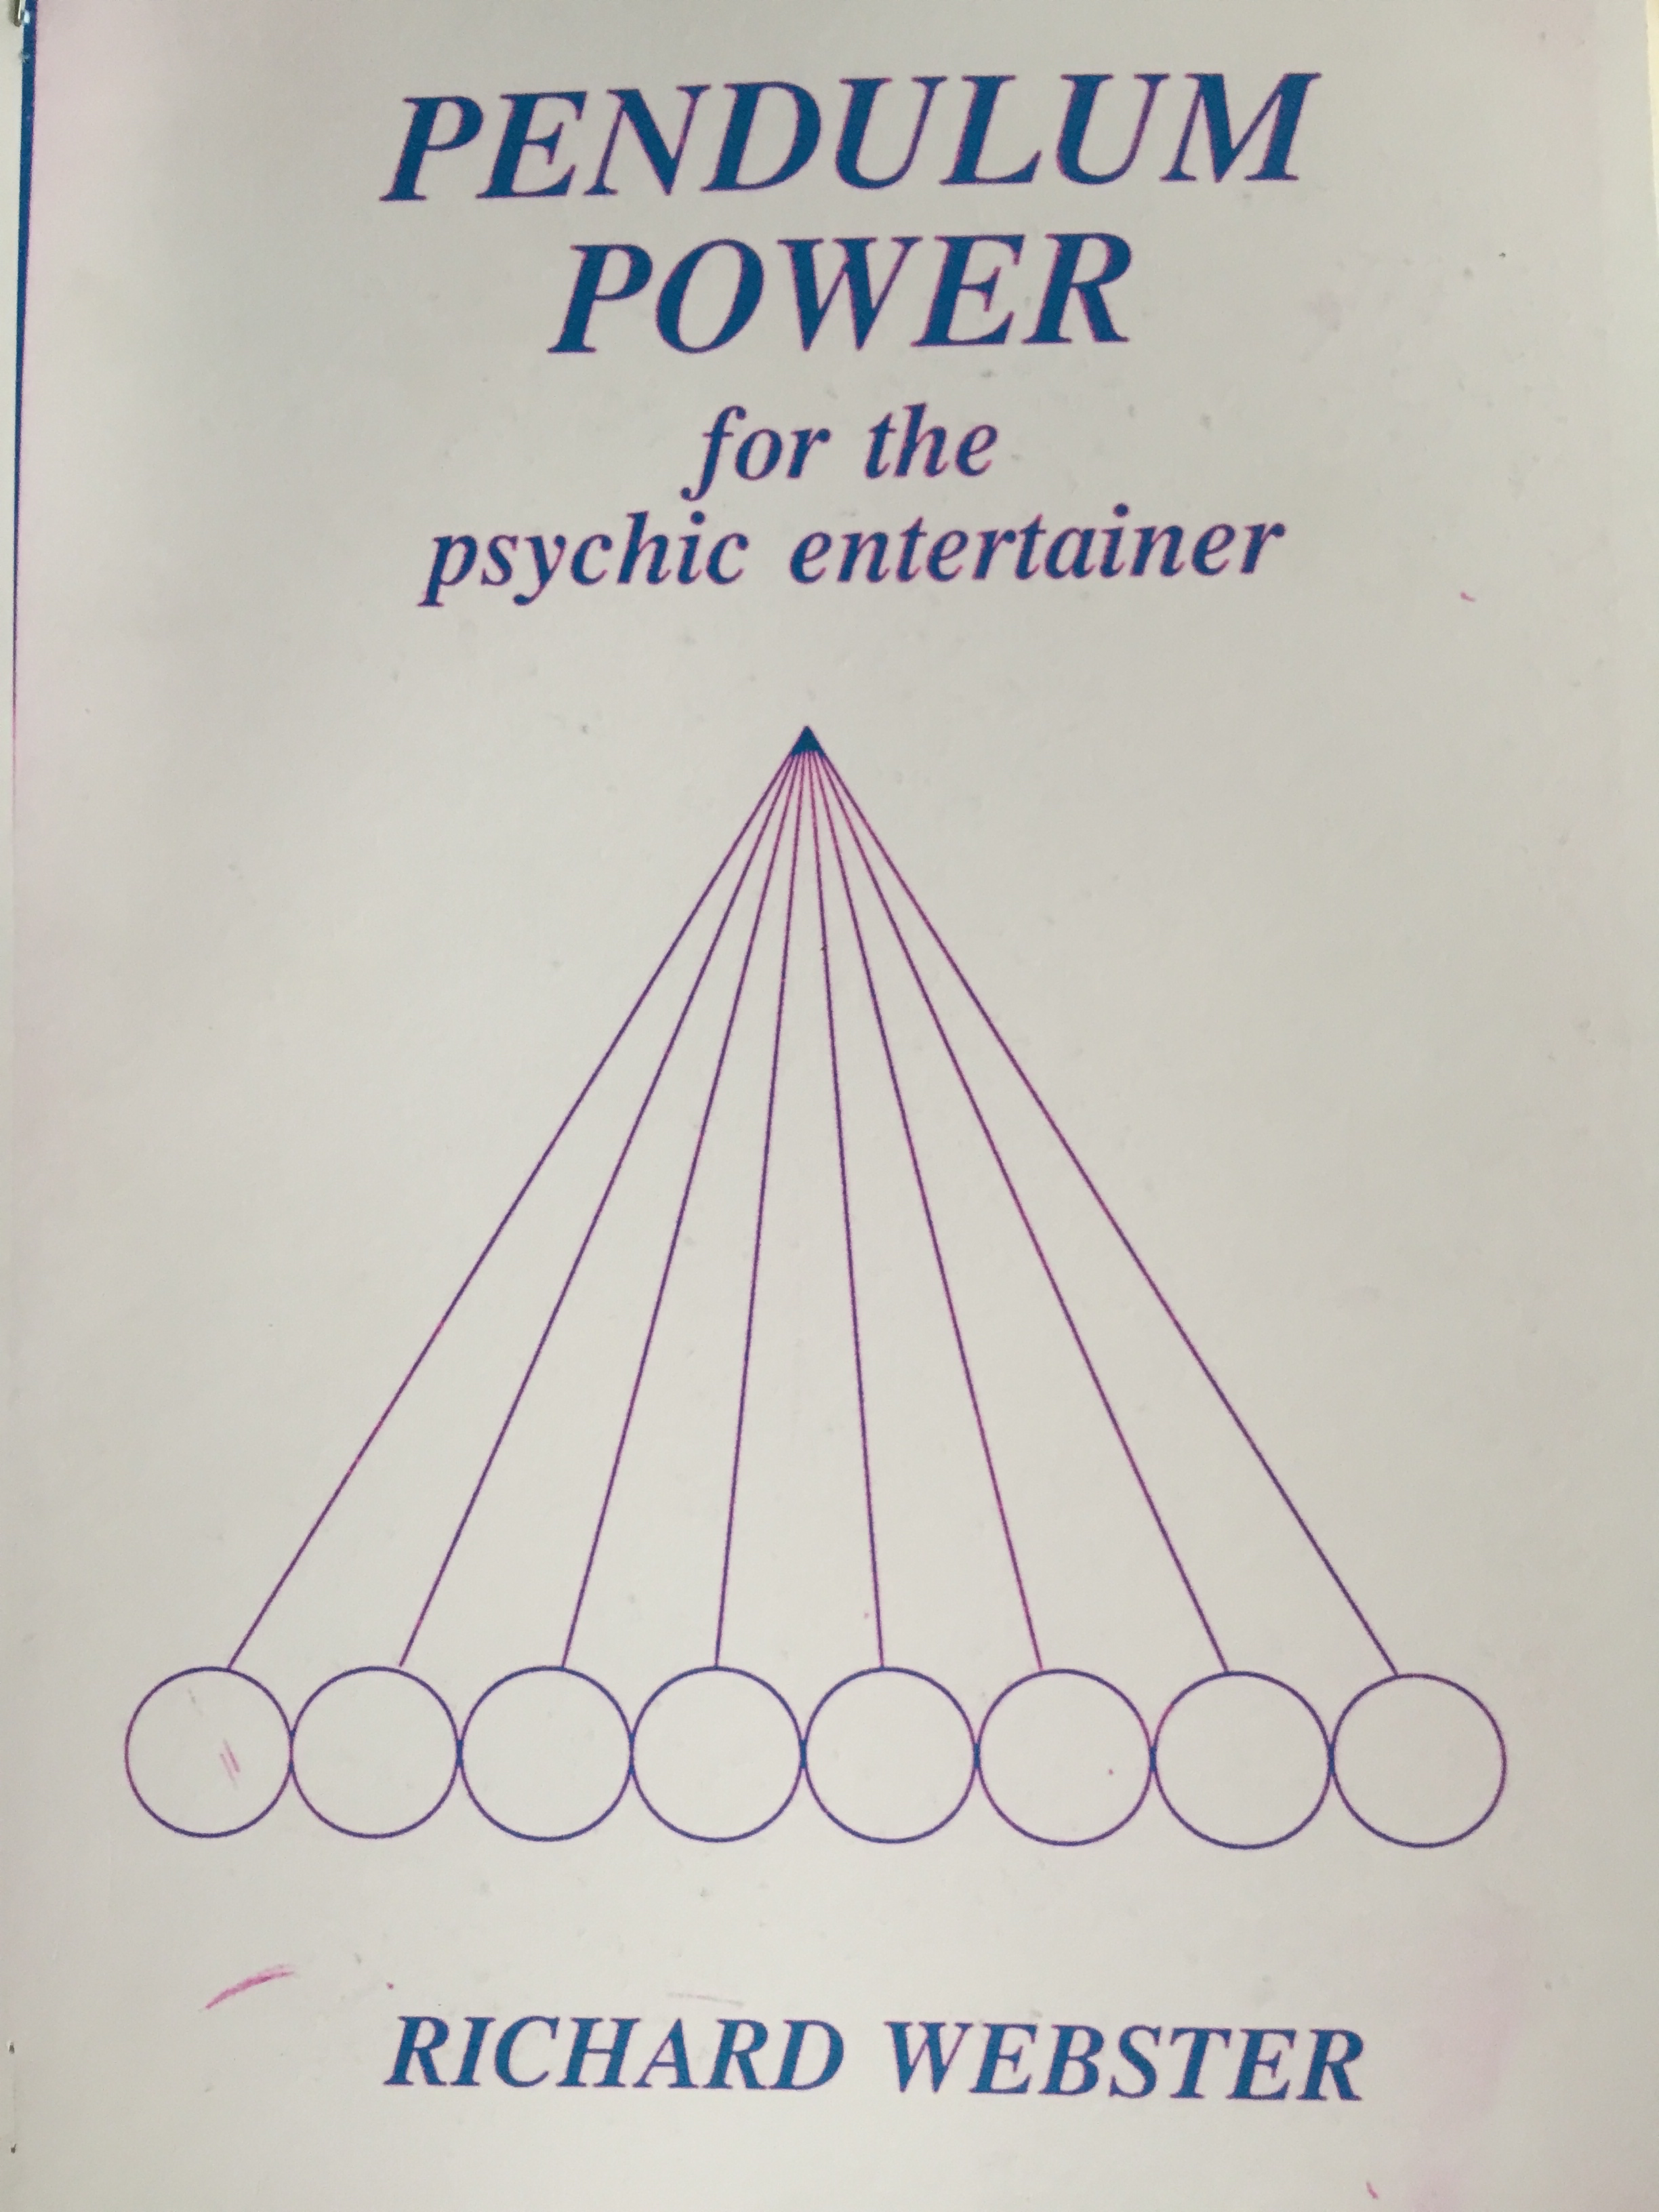 Richard Webster - Pendulum Power for the Psychic Entertainer